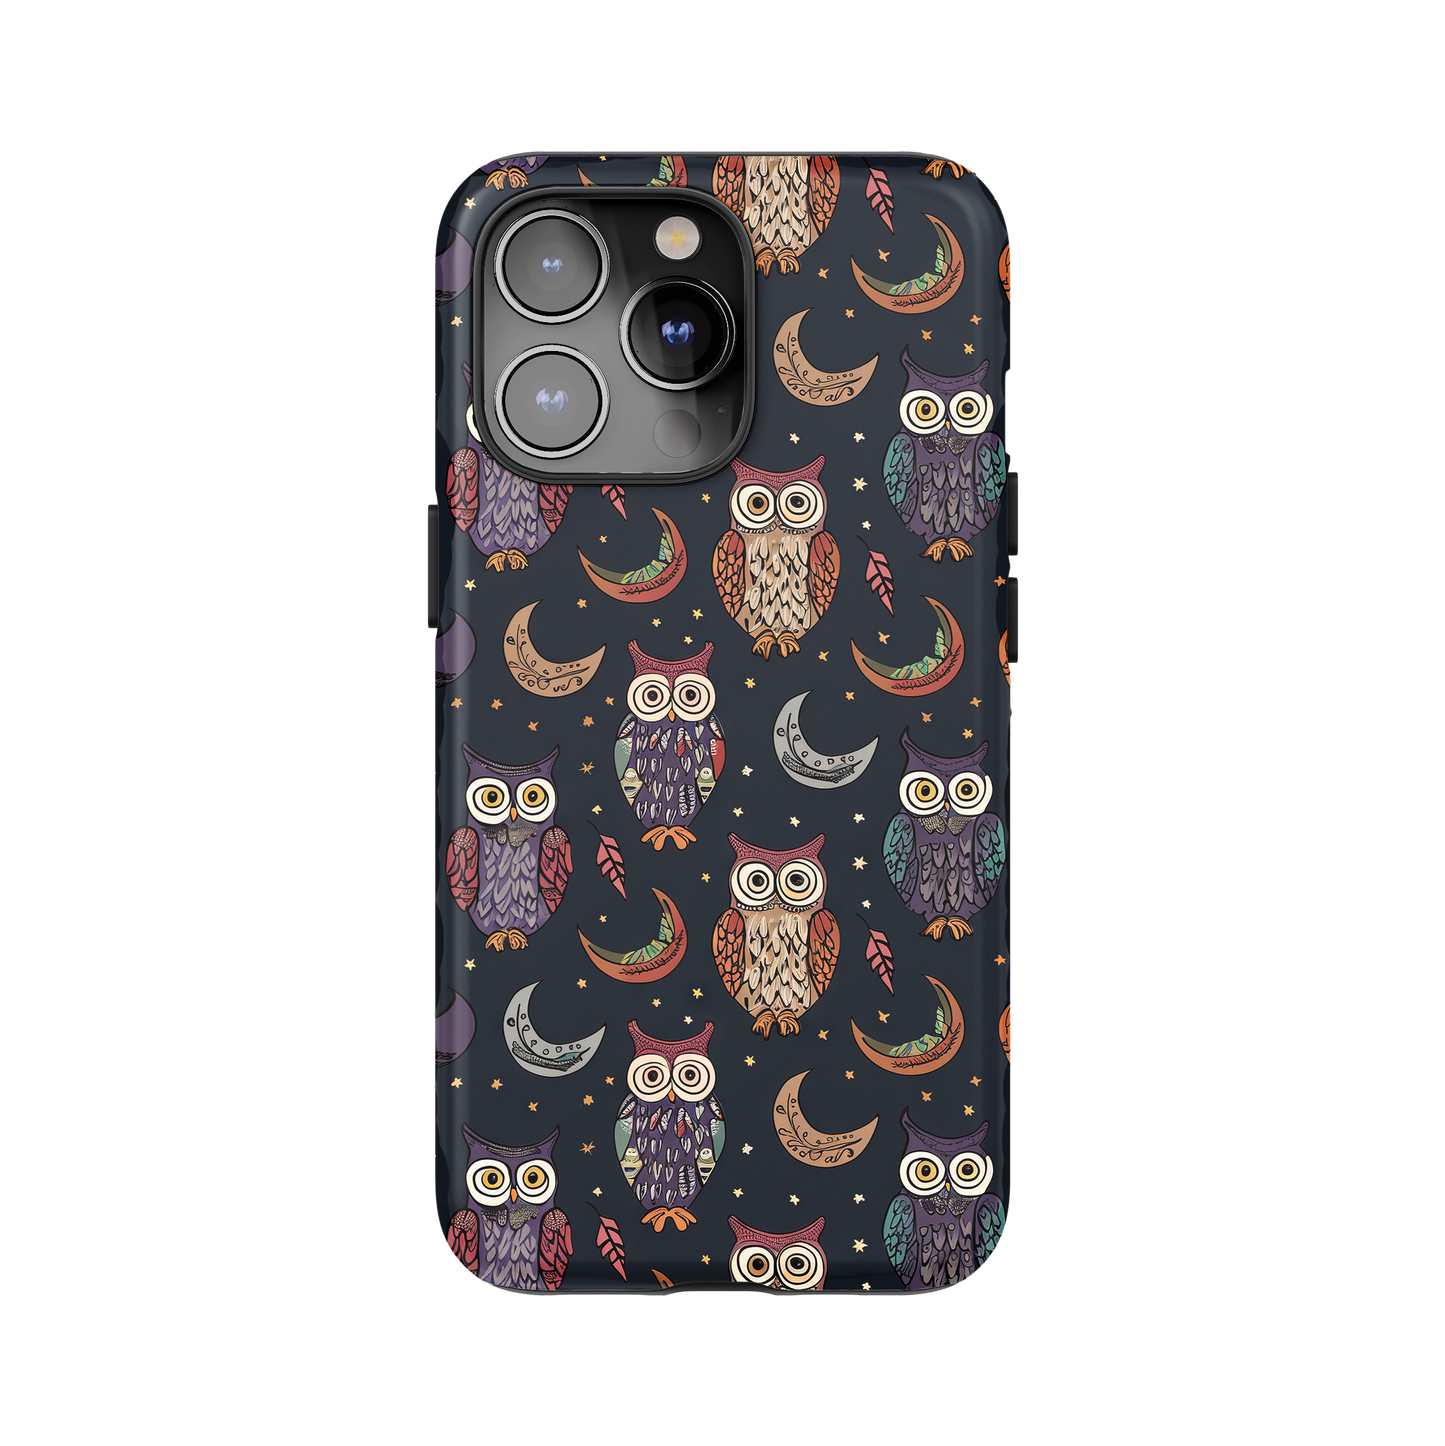 Dark Owls Phone Case for iPhone and Samsung